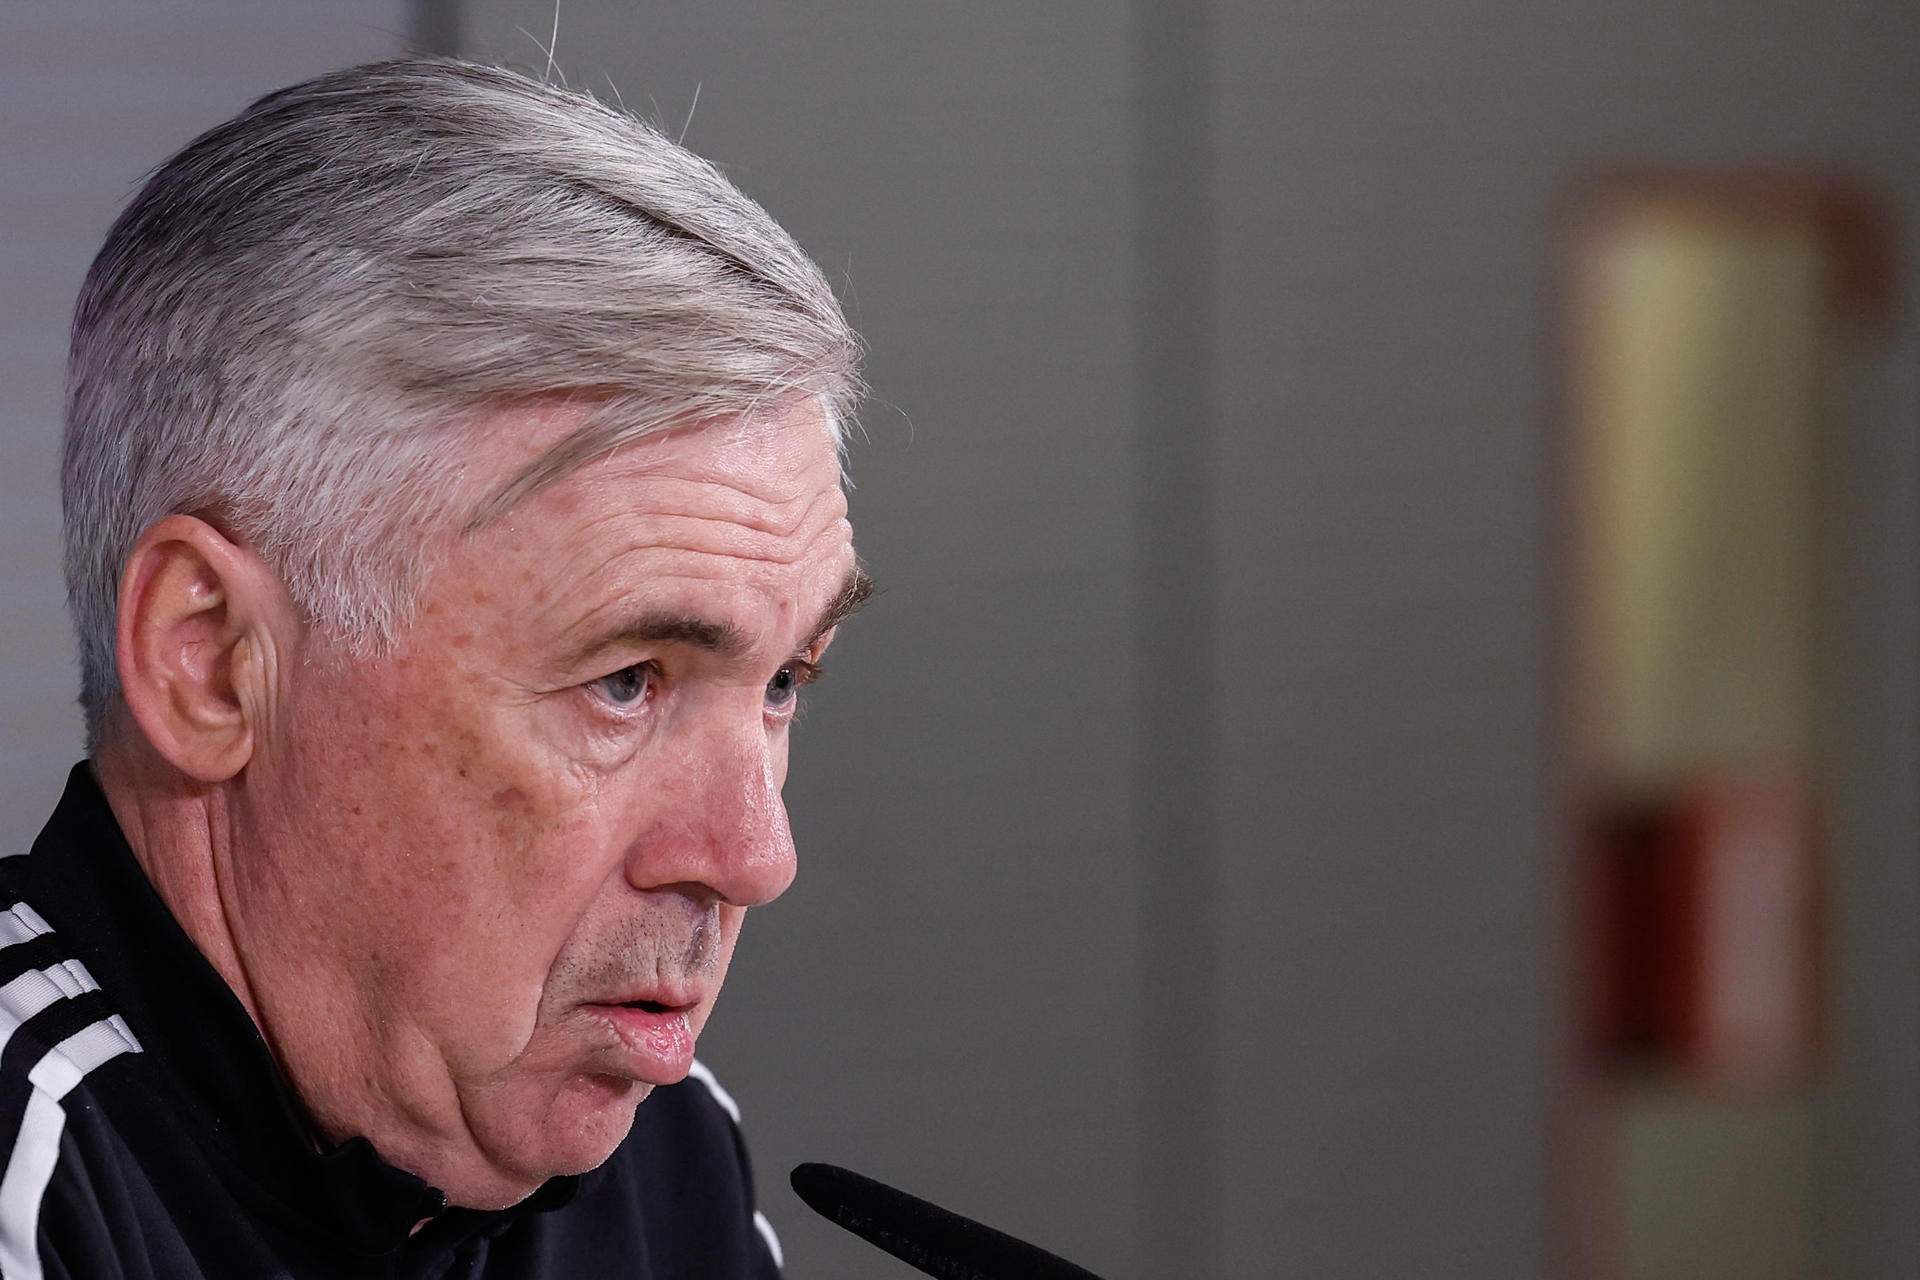 Carlo Ancelotti was self-critical after losing to Barcelona. EFE